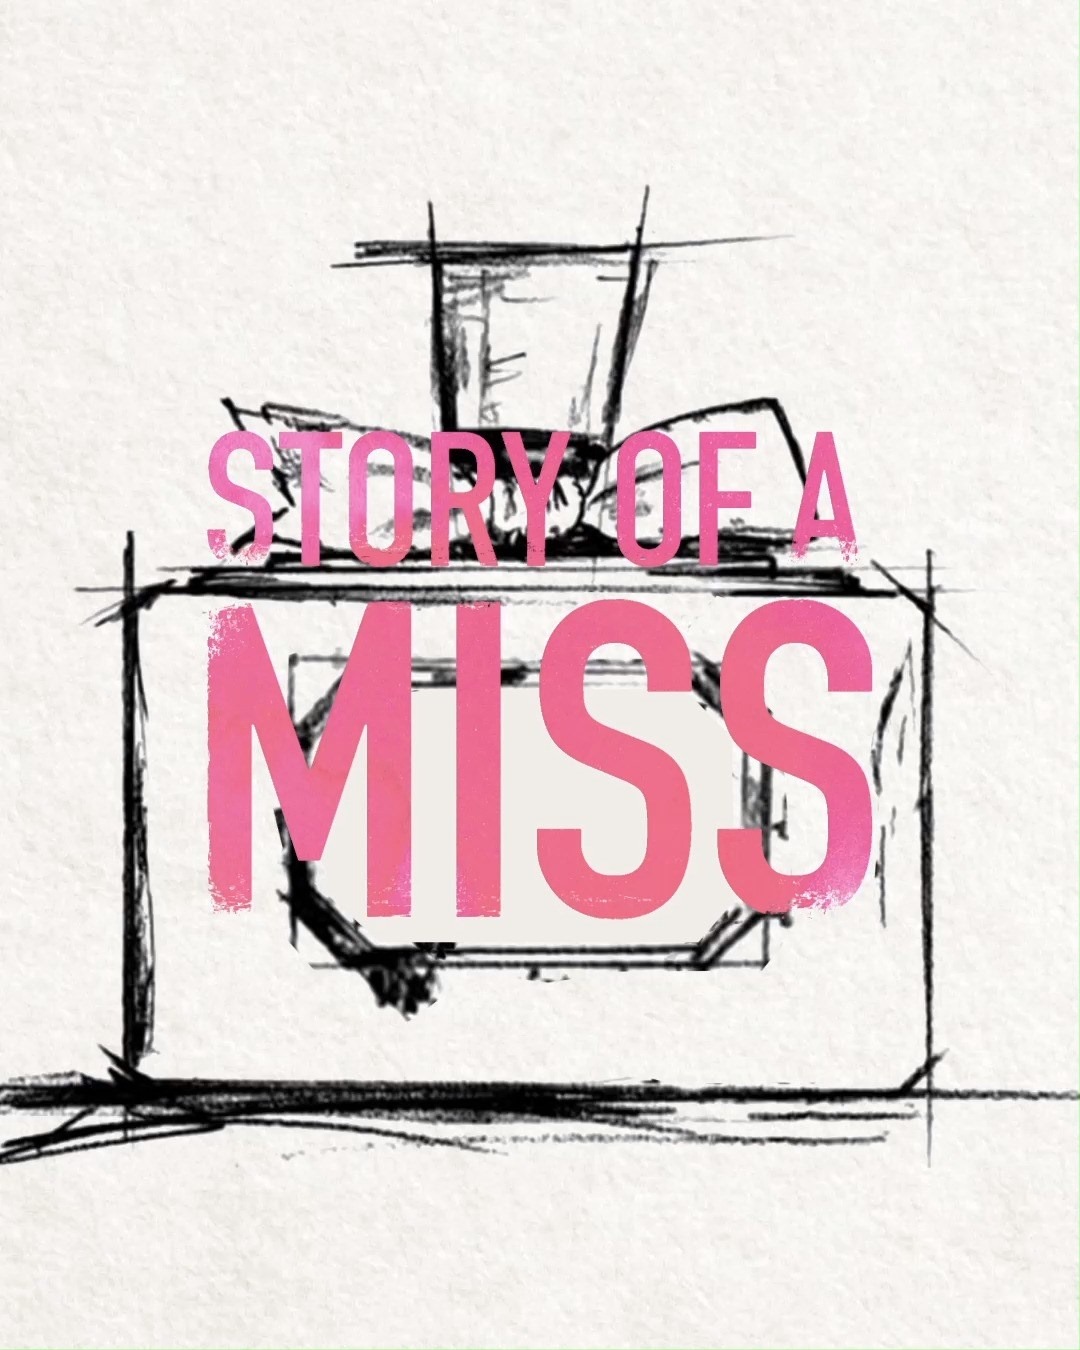 STORY OF A MISS – BEHIND THE BOTTLE